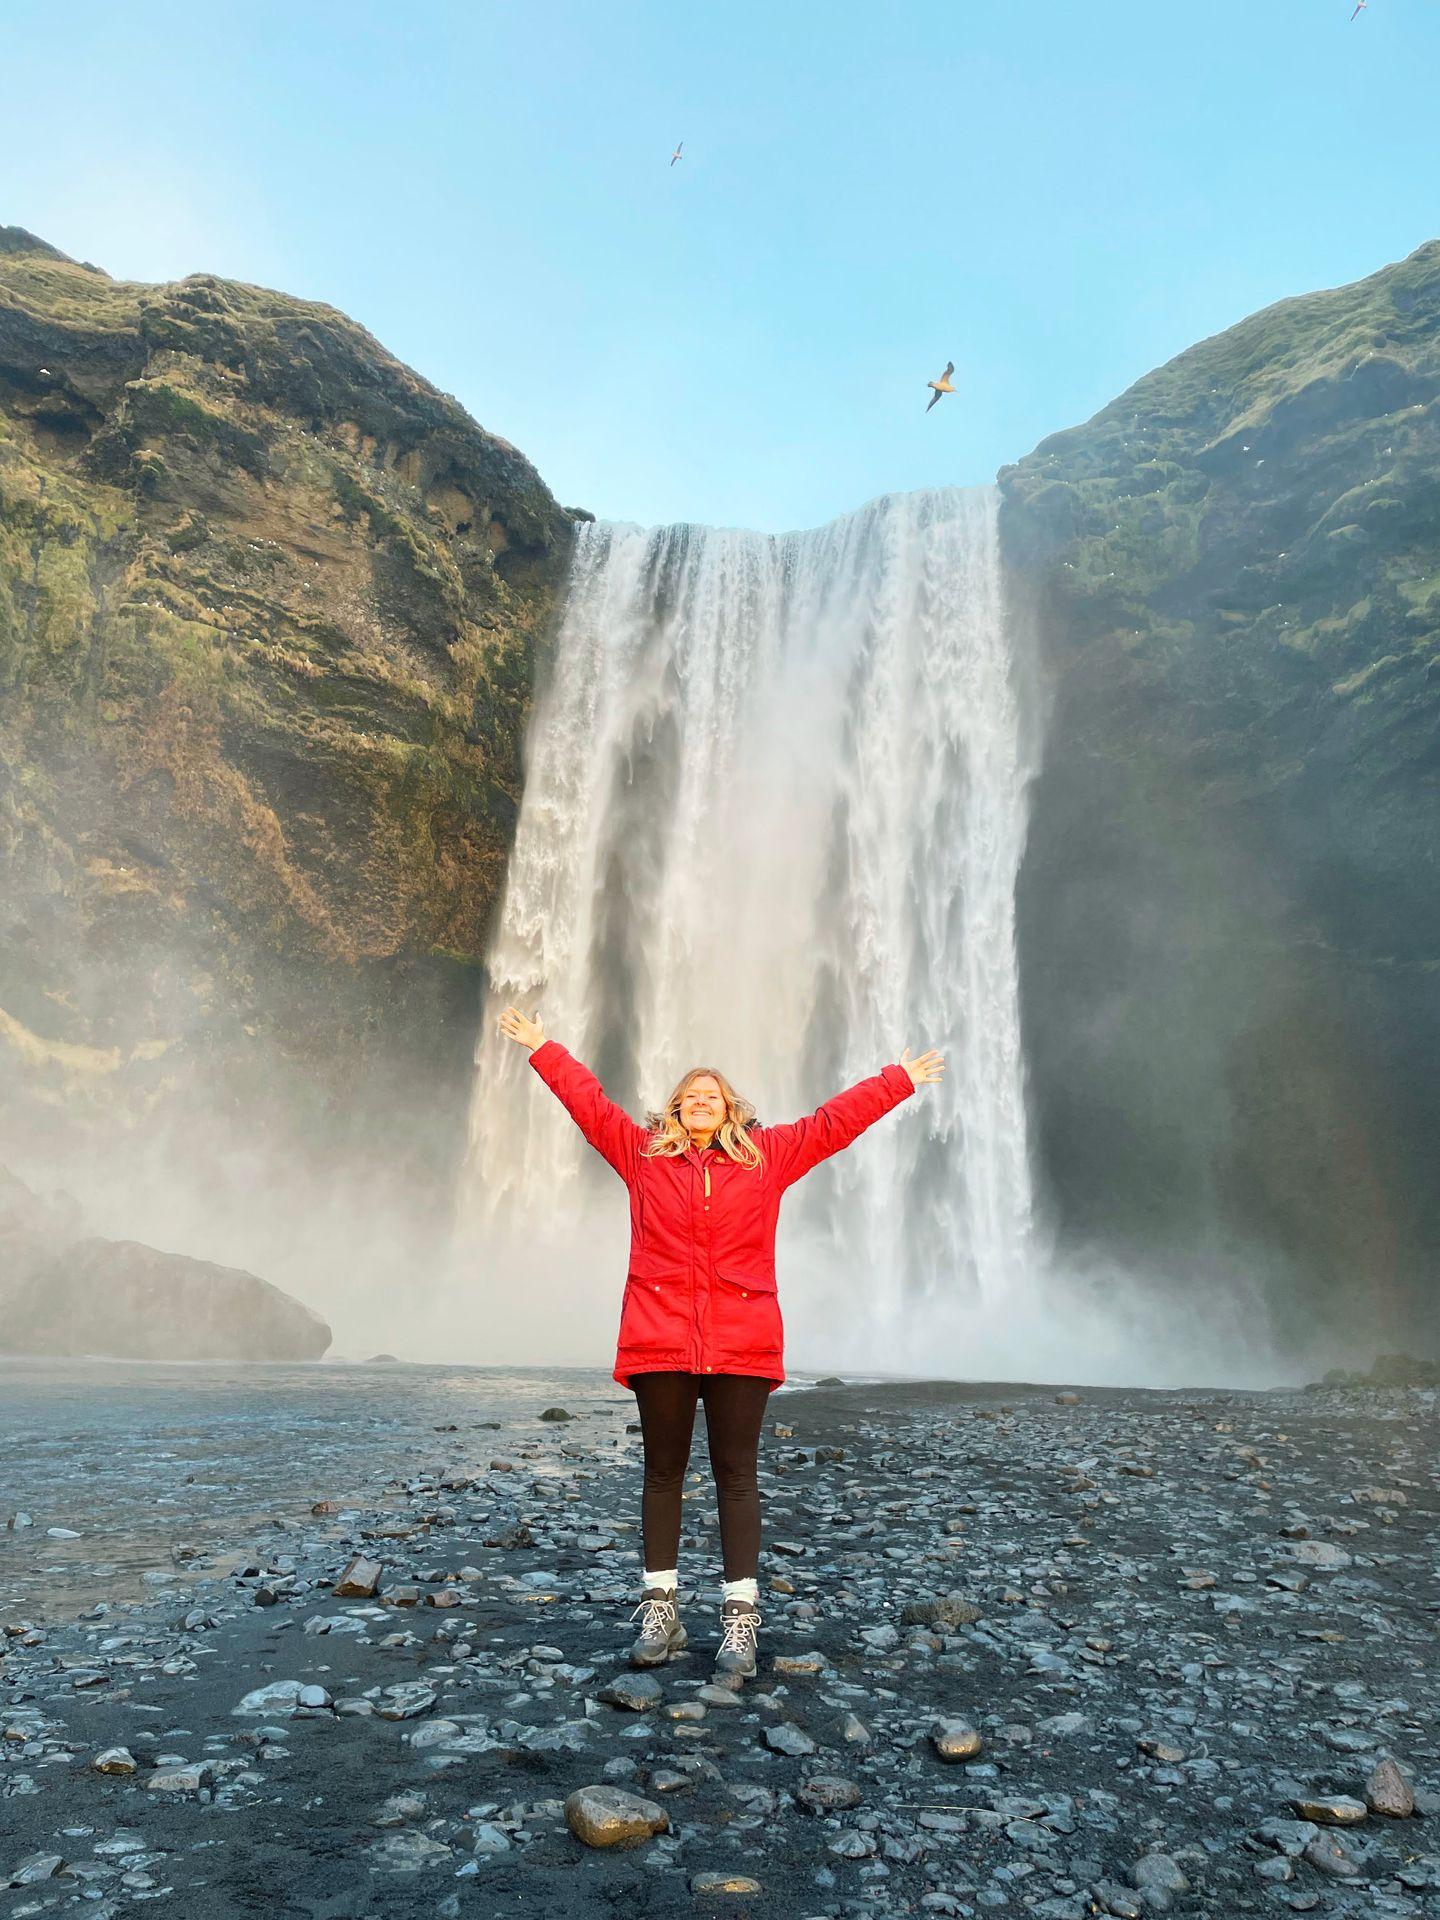 Lydia standing in front of a huge waterfall with her hands in the air.